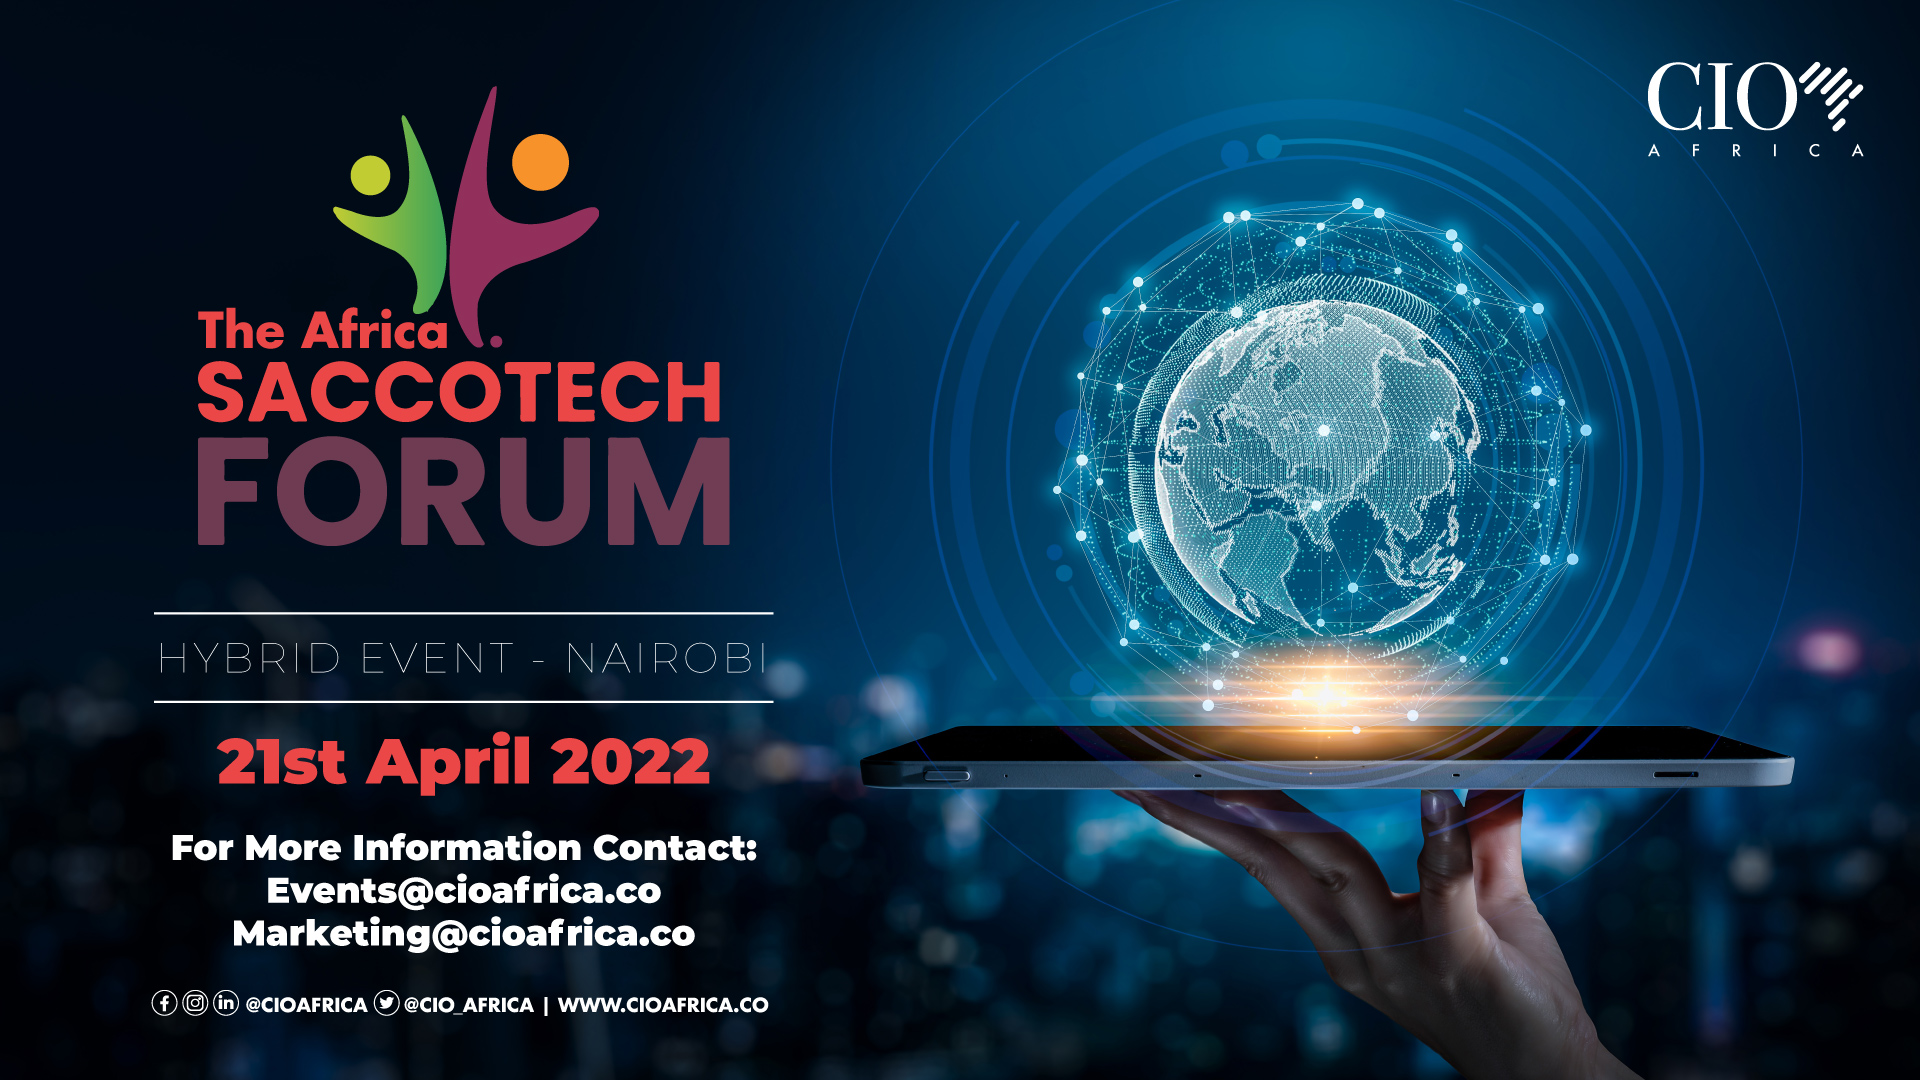 The stage is set for the Africa Saccotech forum